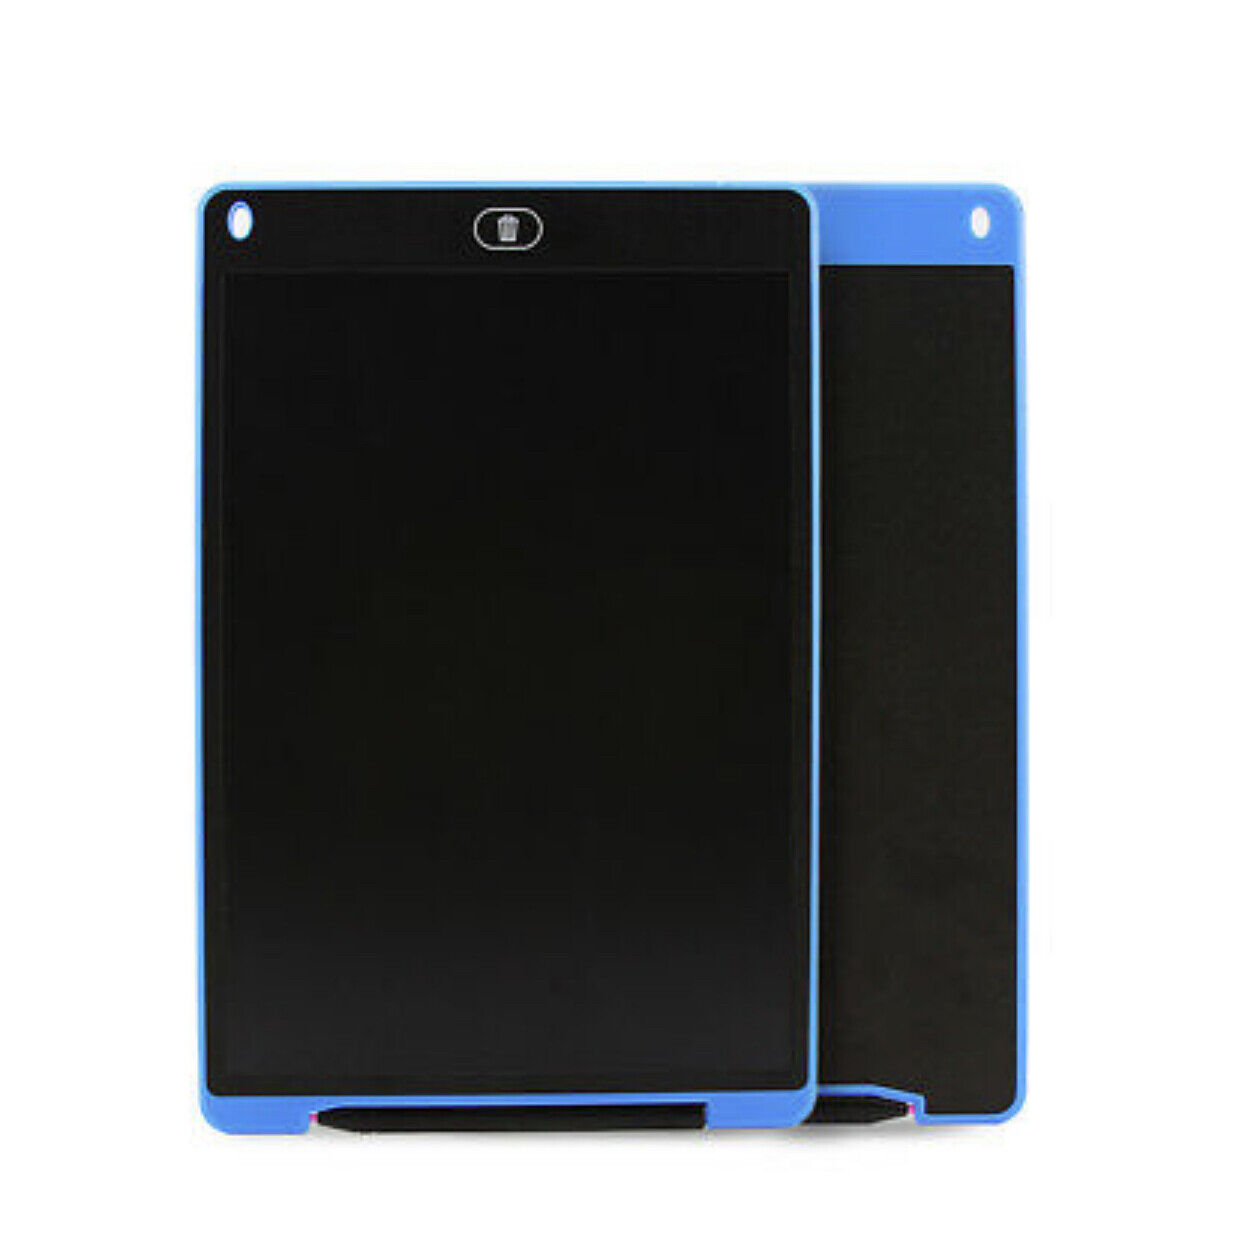 8.5/12 inch Portable LCD Writing Tablet Electronic Drawing Board Notepad for Kid